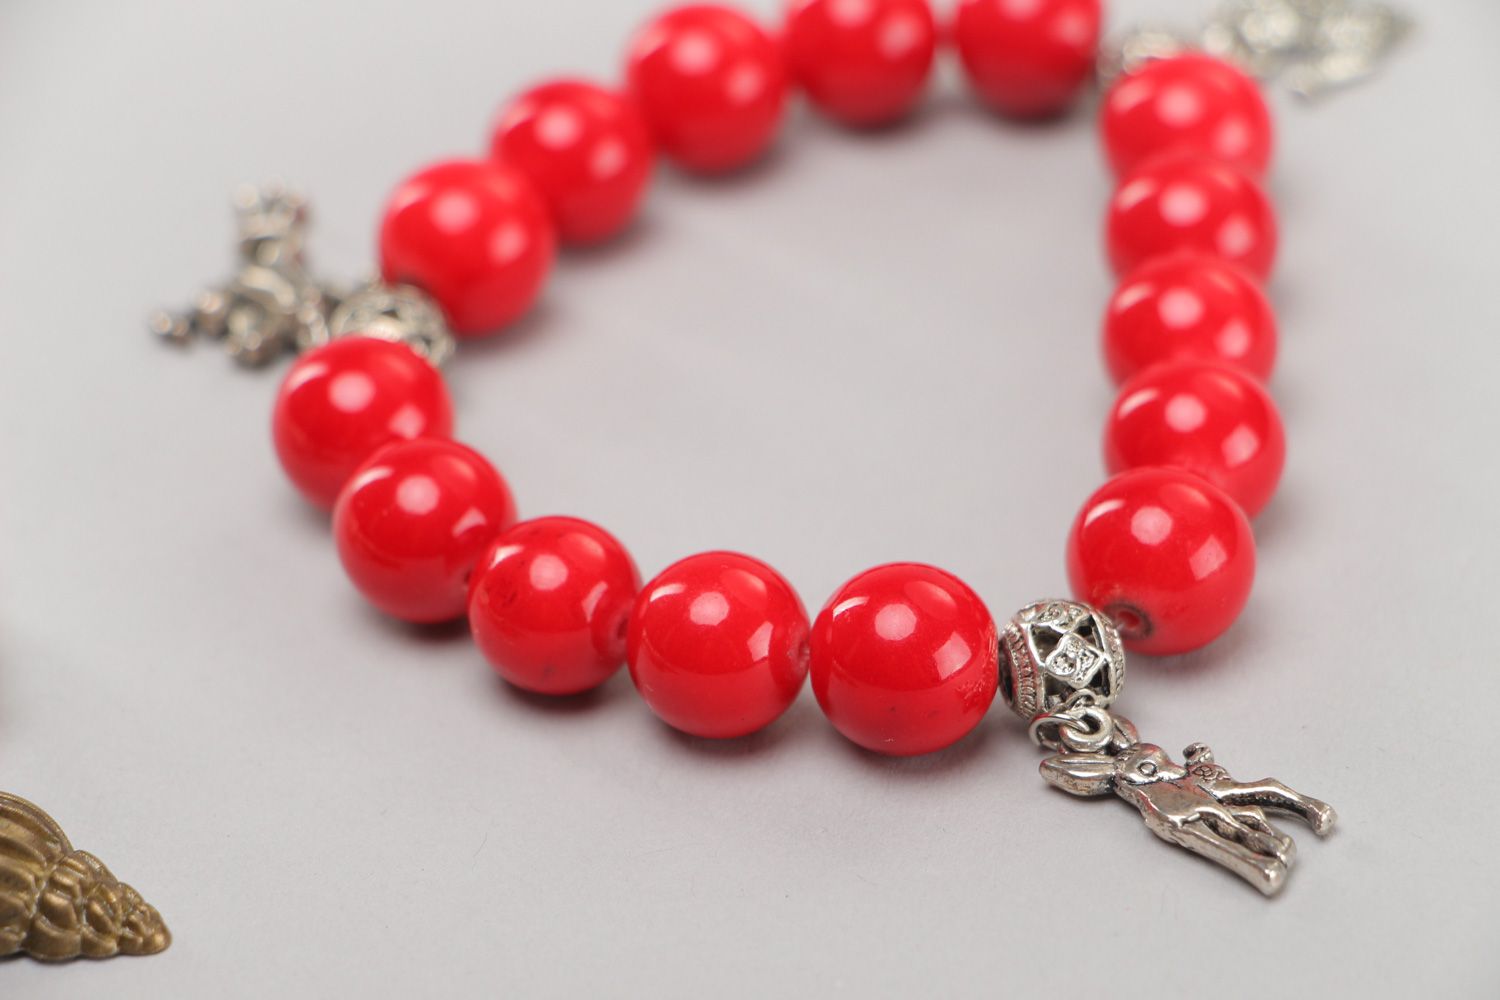 Designer handmade wrist bracelets with red beads and metal charms 2 items photo 4